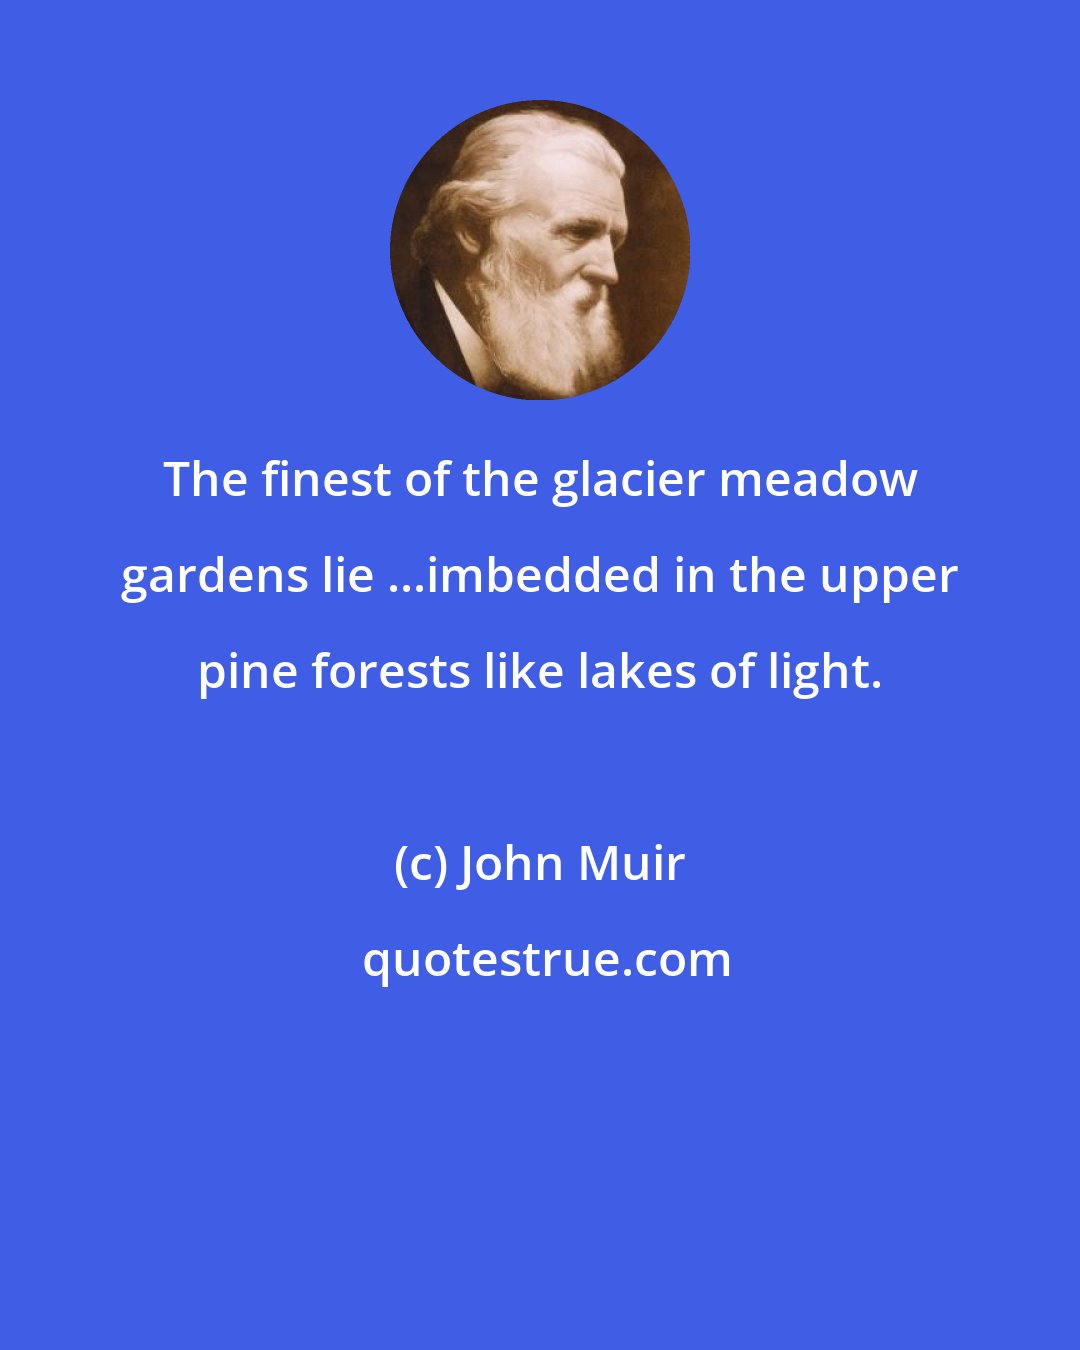 John Muir: The finest of the glacier meadow gardens lie ...imbedded in the upper pine forests like lakes of light.